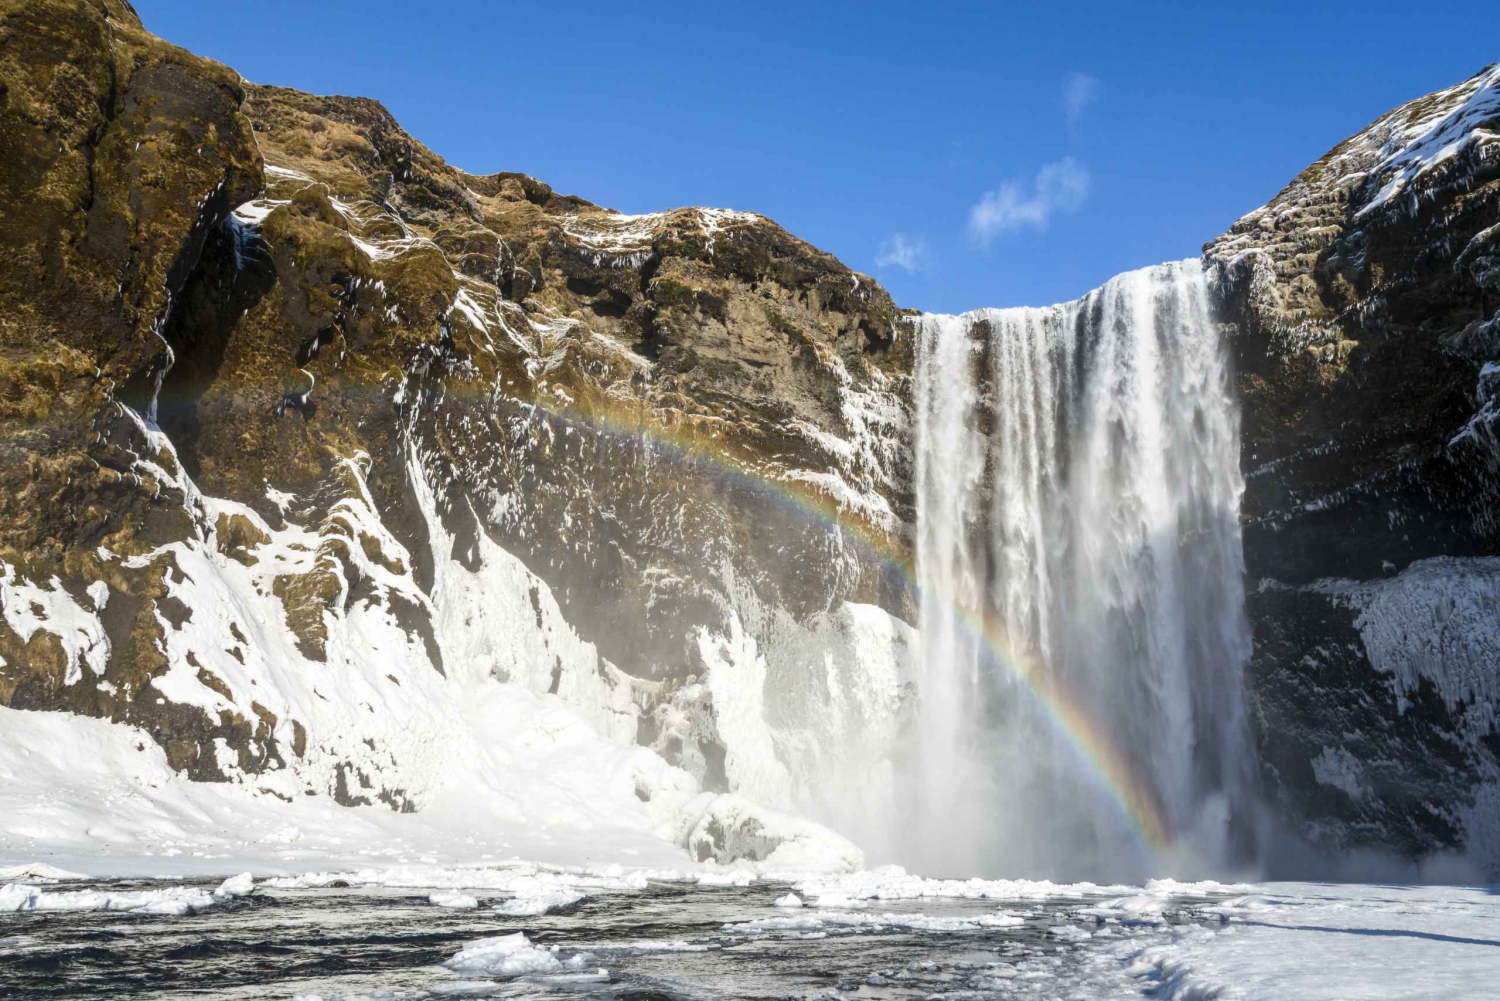 South of Iceland Full-Day Tour from Reykjavik